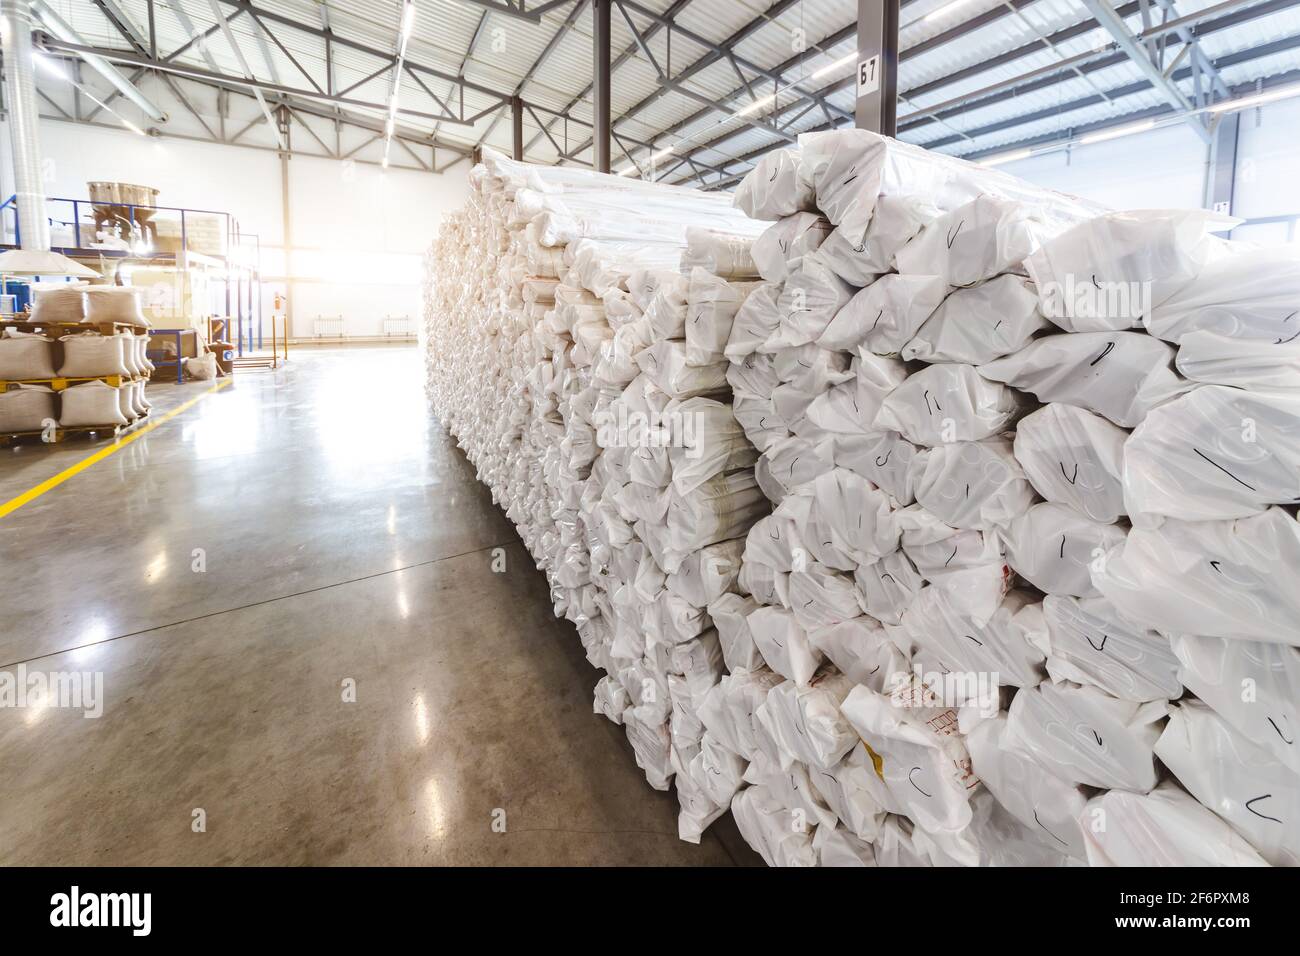 Warehousing of finished products for shipment to consumers at the factory. Stock Photo